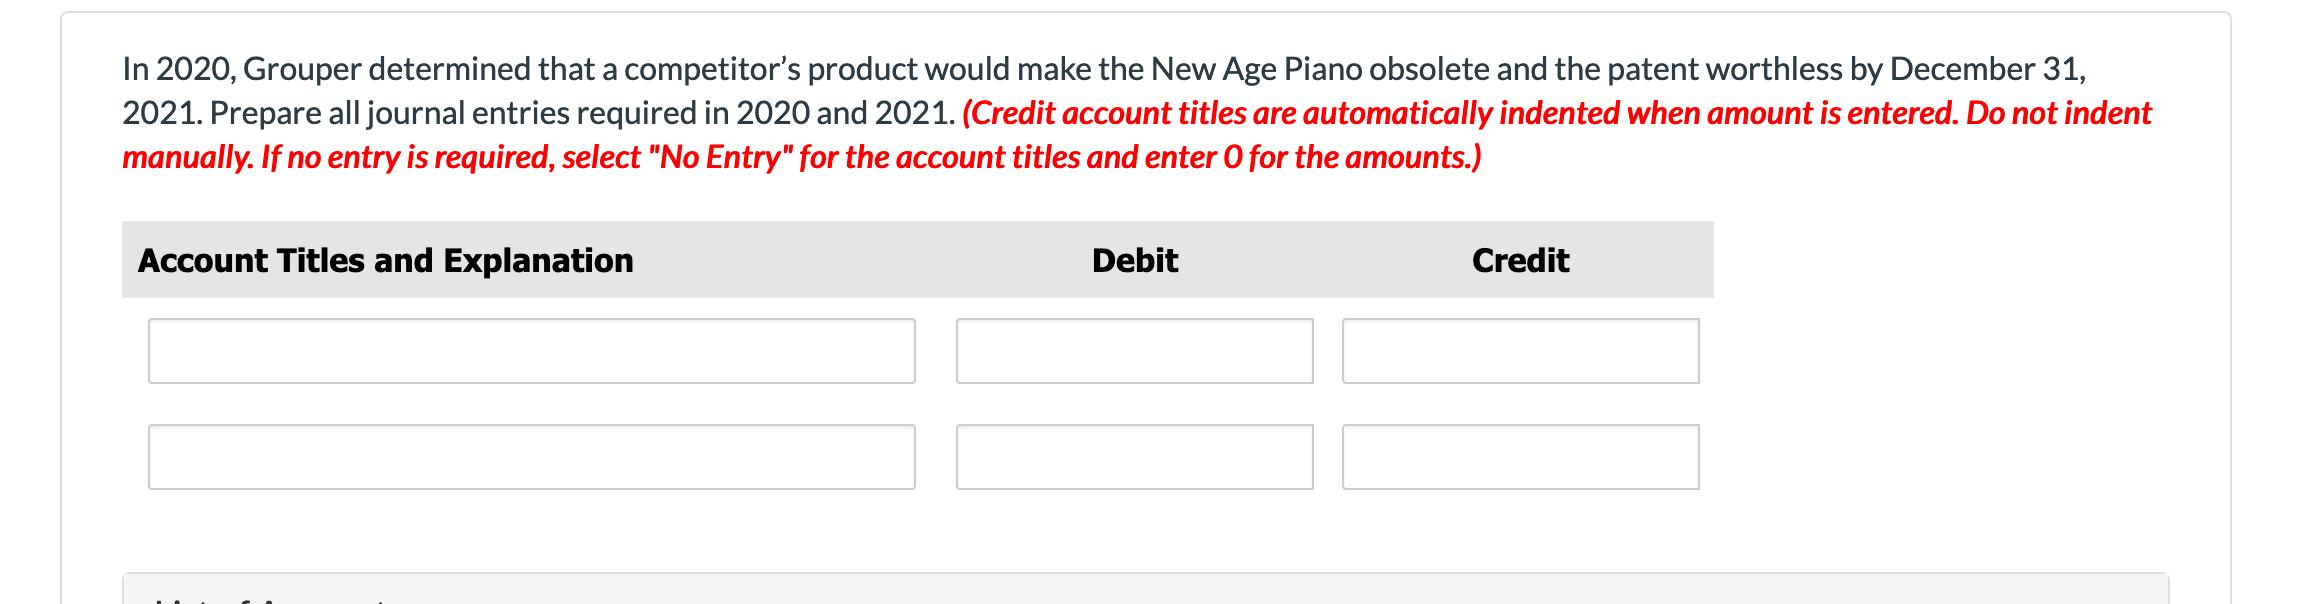 In 2020, Grouper determined that a competitors product would make the New Age Piano obsolete and the patent worthless by Dec